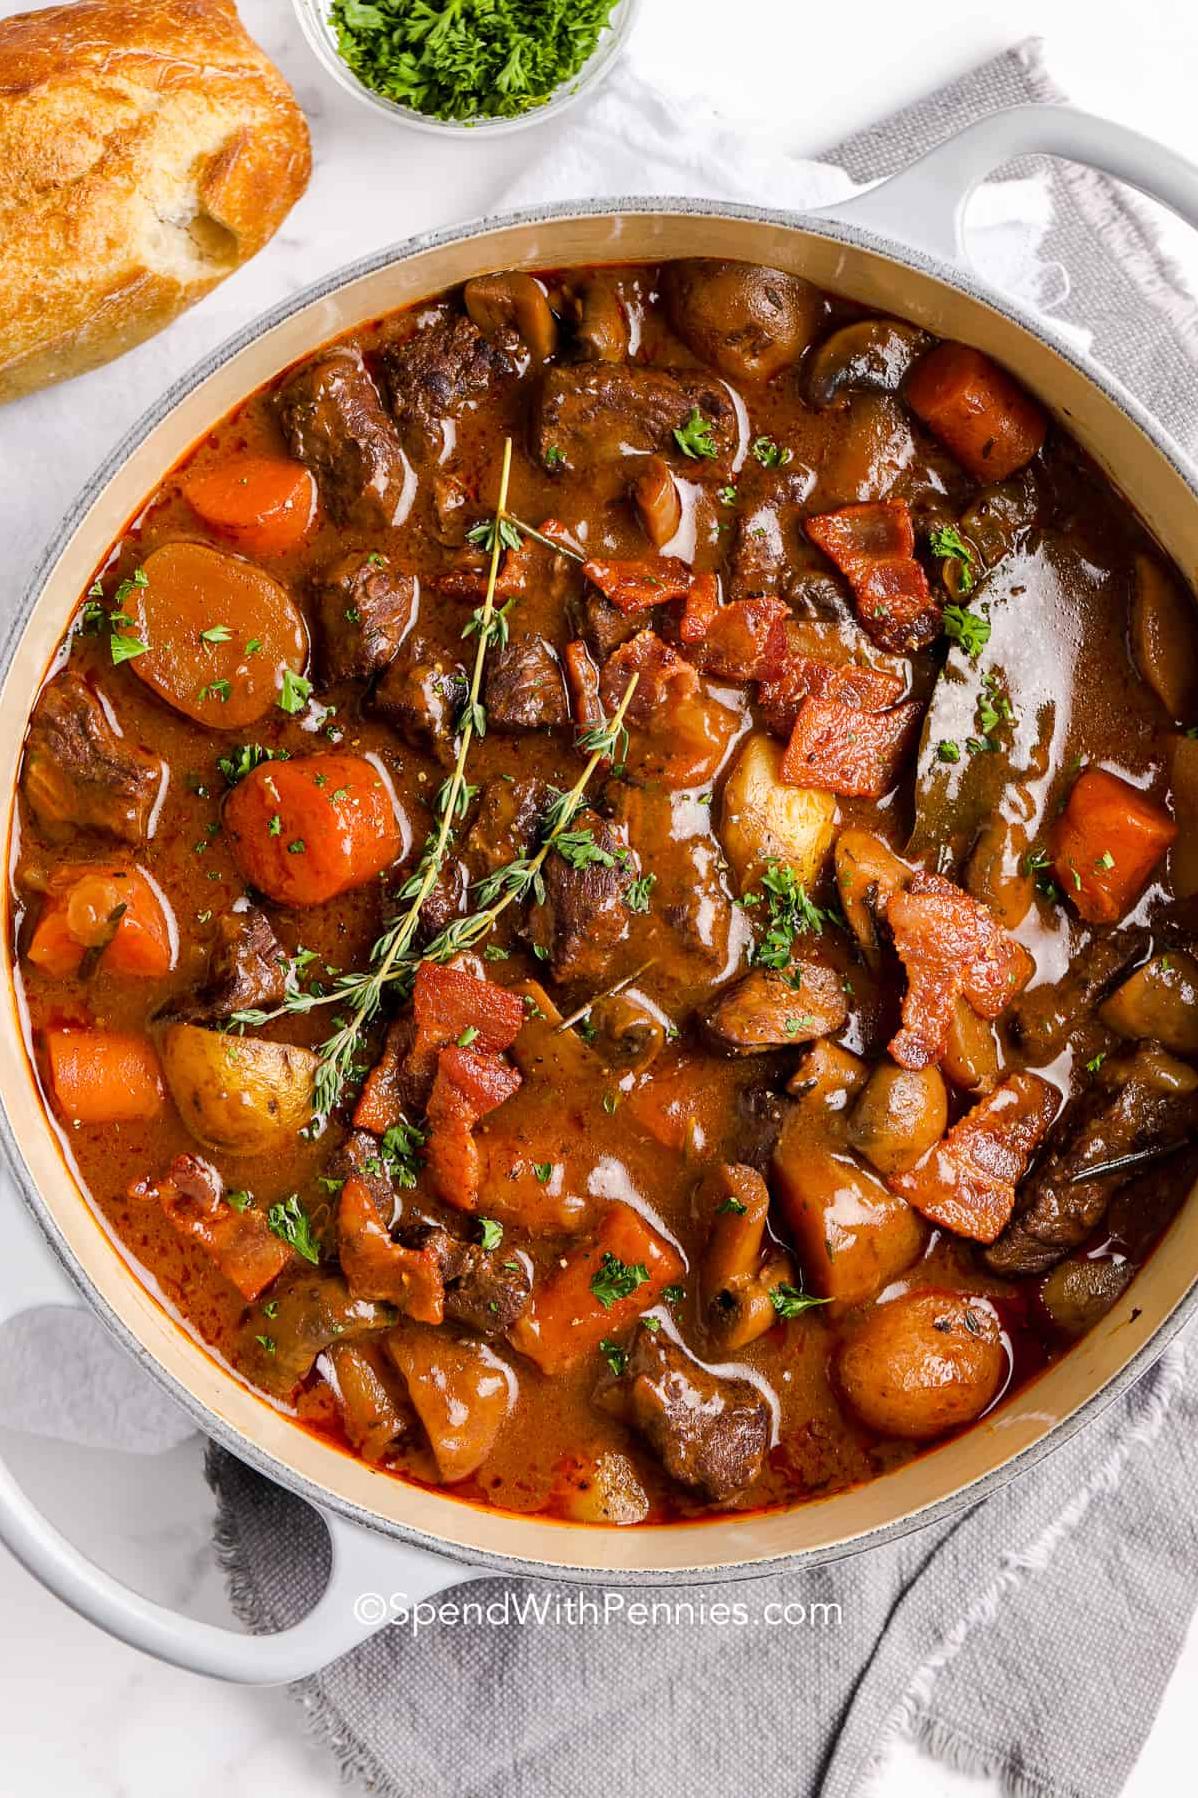  This savory stew is a feast for both the eyes and the taste buds.